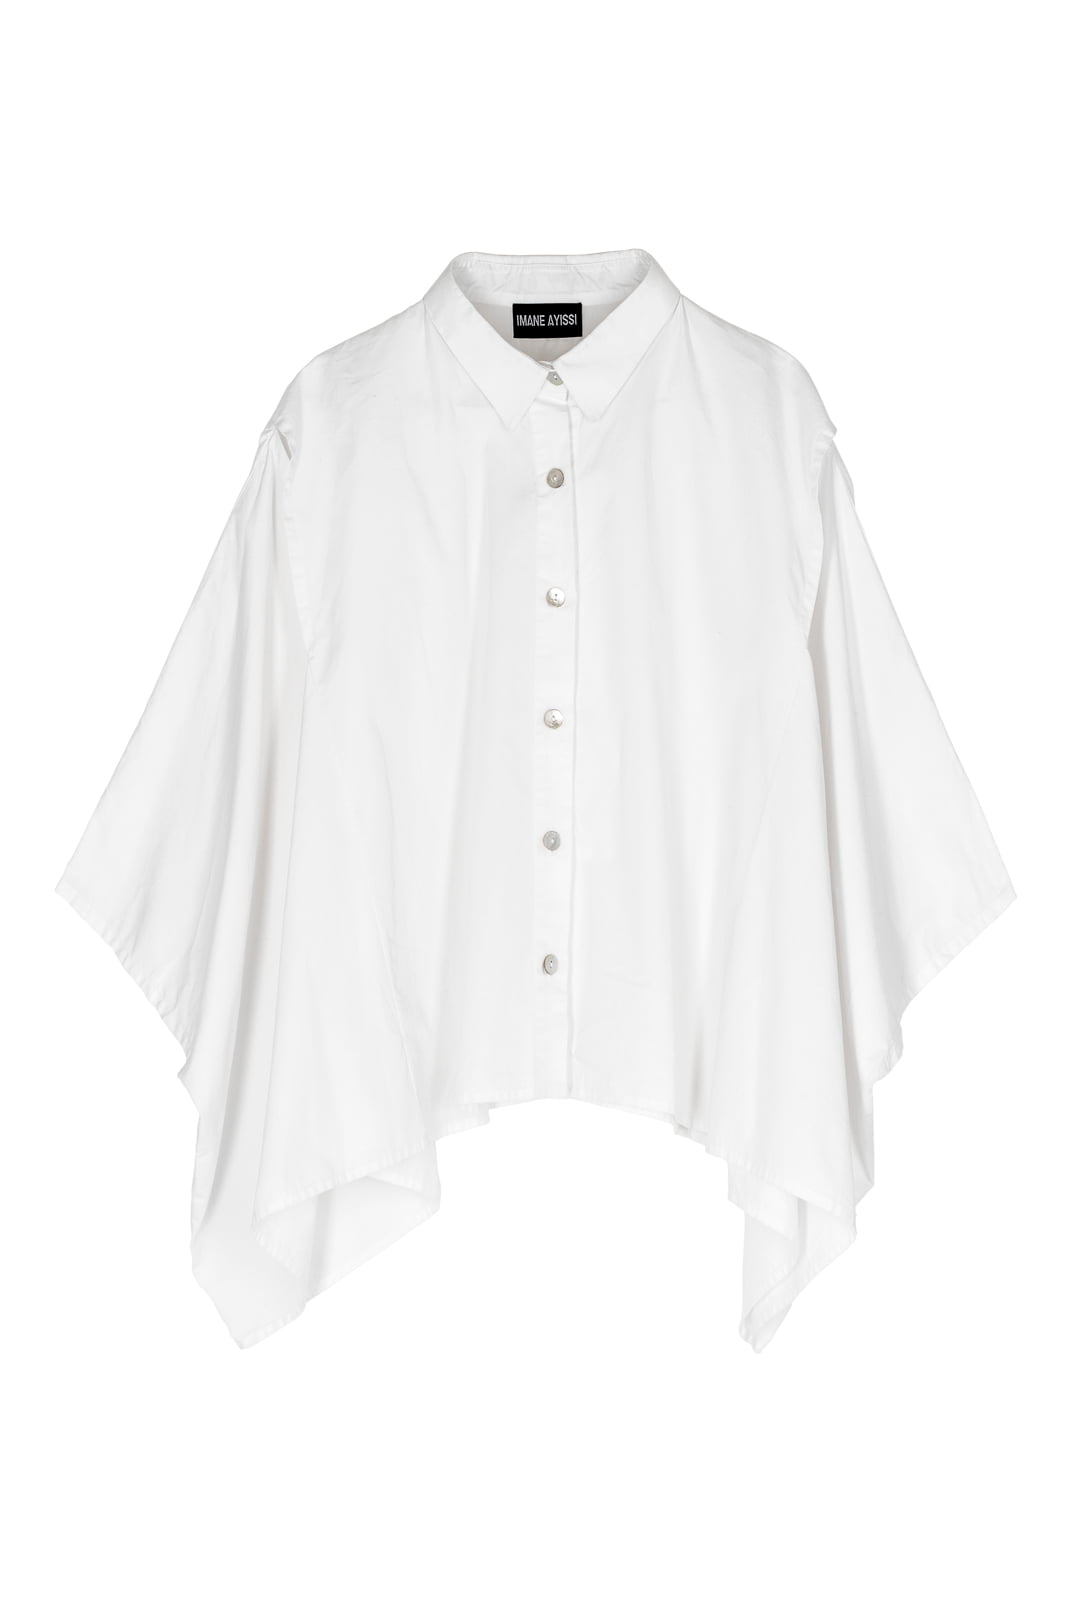 Chemise blanche haute couture Imane Ayissi